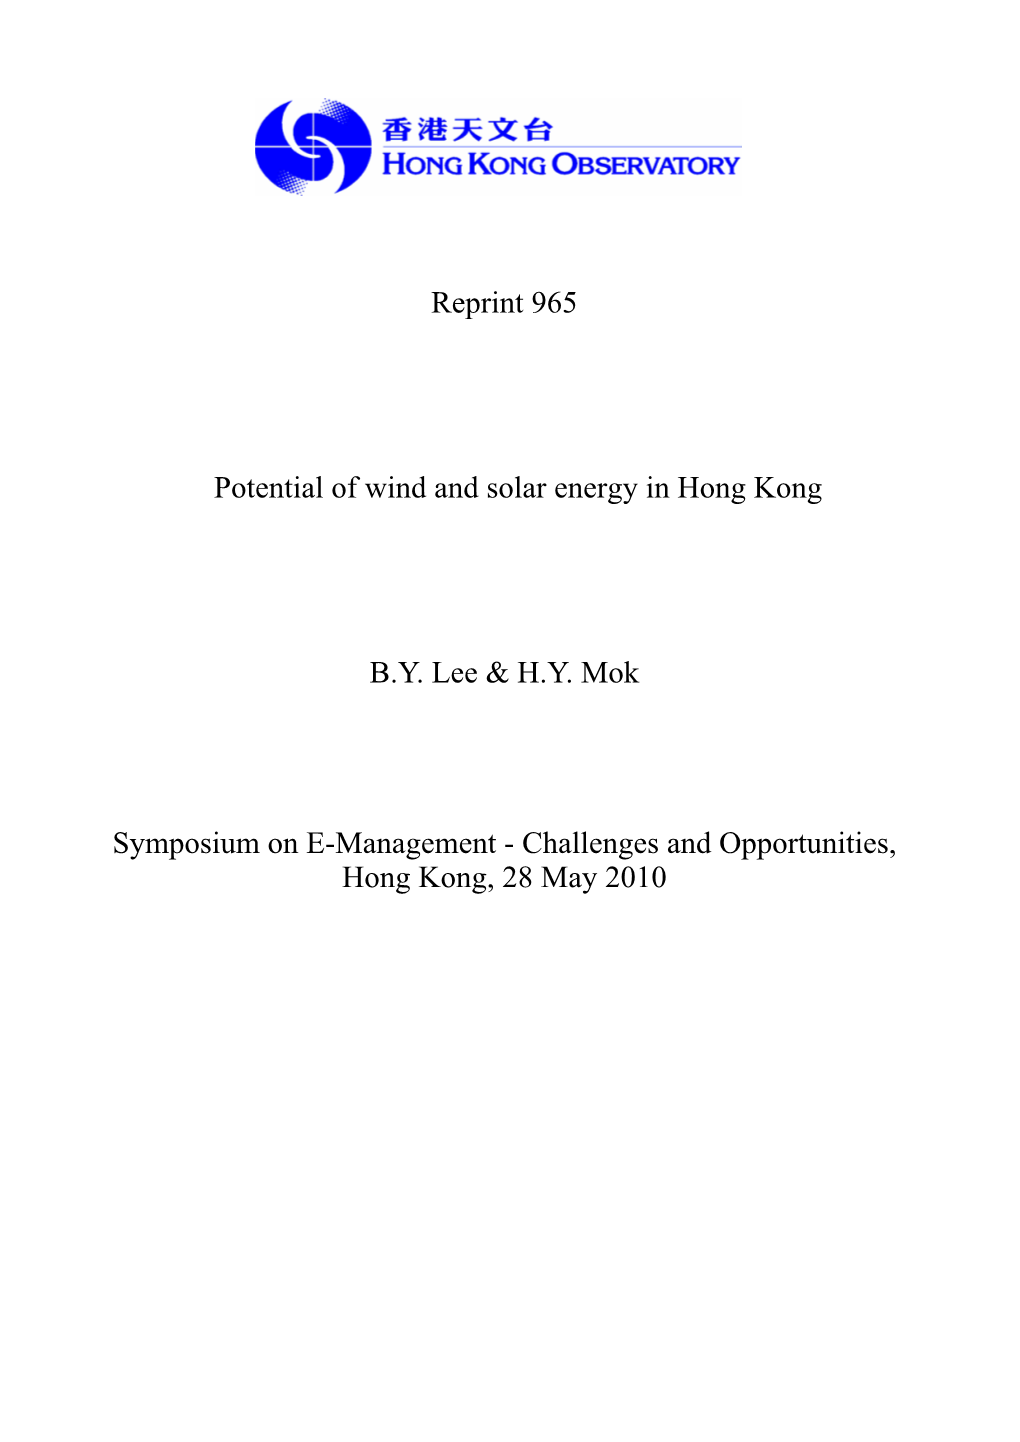 Reprint 965 Potential of Wind and Solar Energy in Hong Kong B.Y. Lee